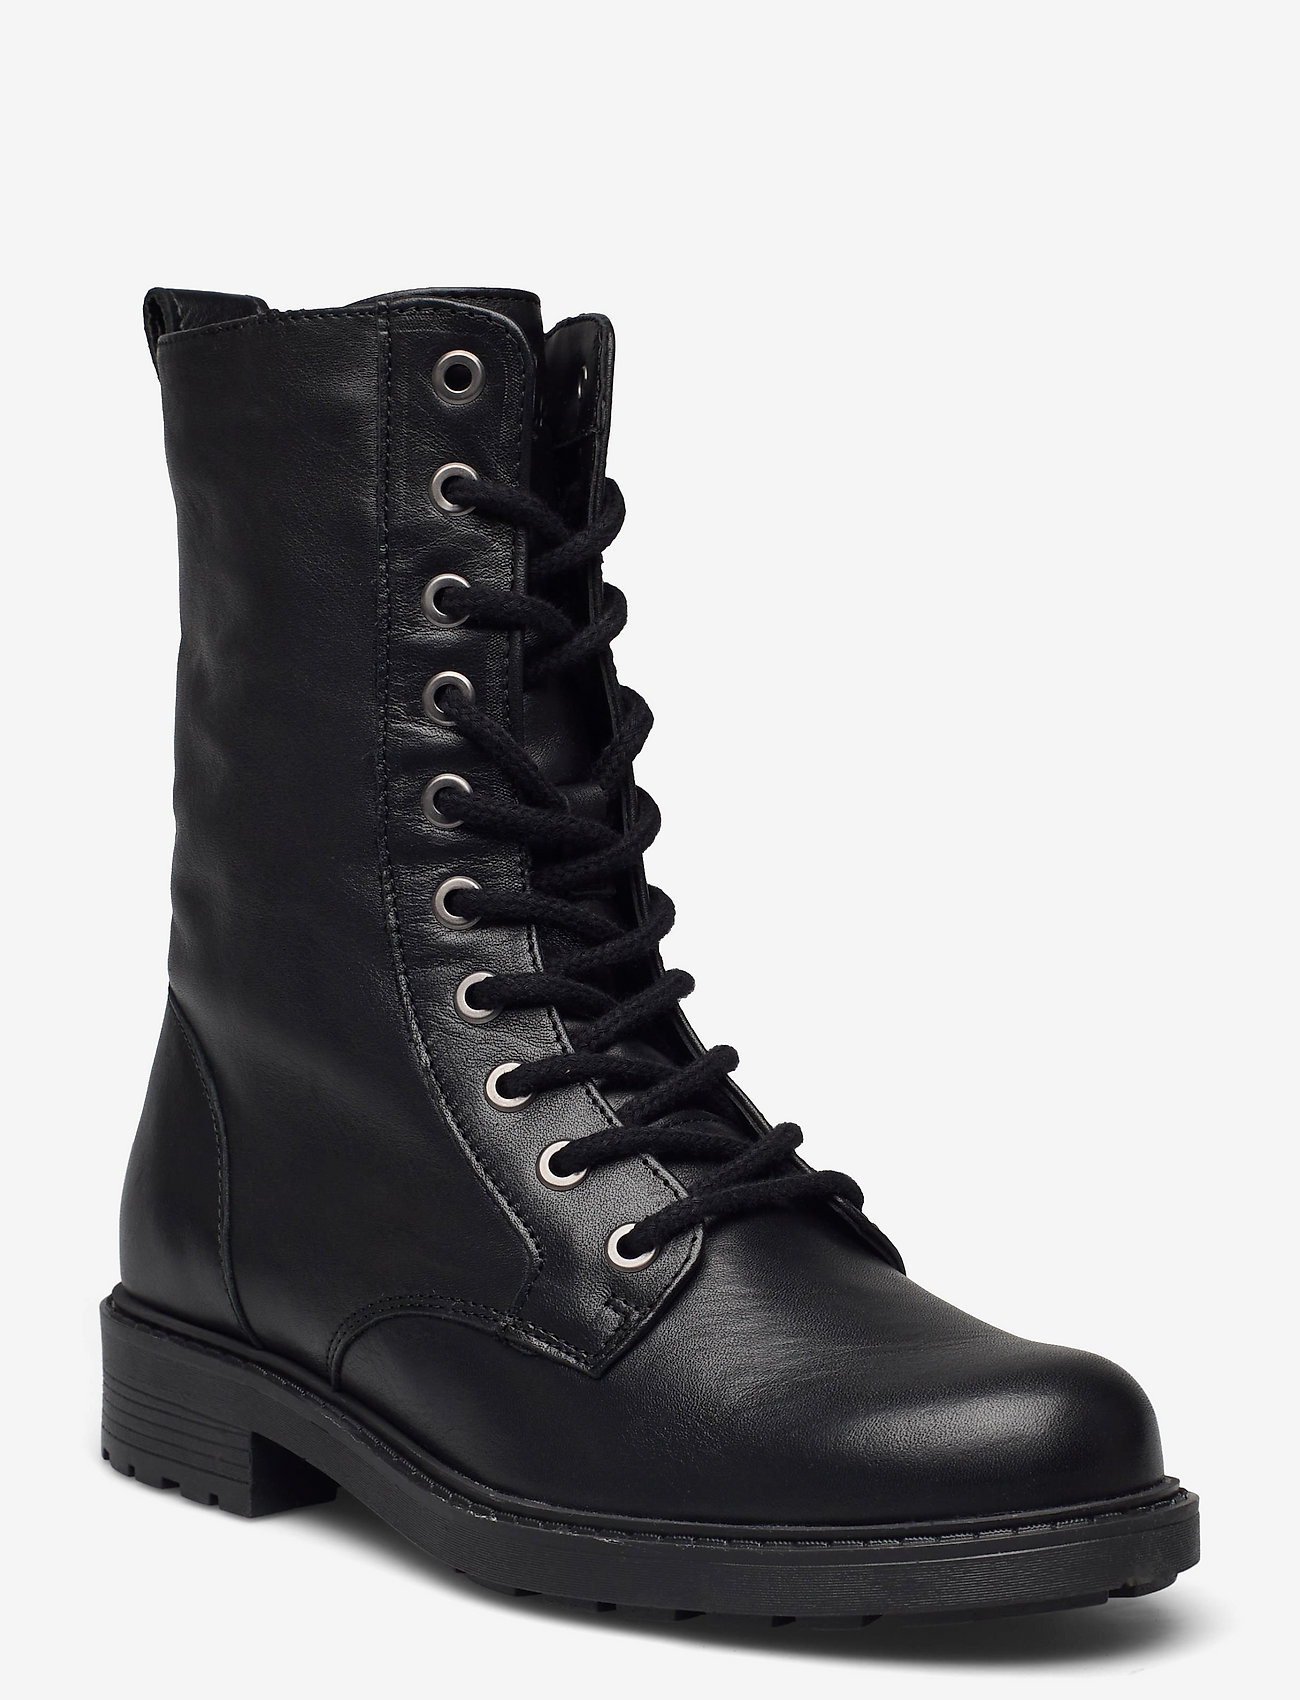 Clarks - Orinoco2 Style - laced boots - black leather - 0